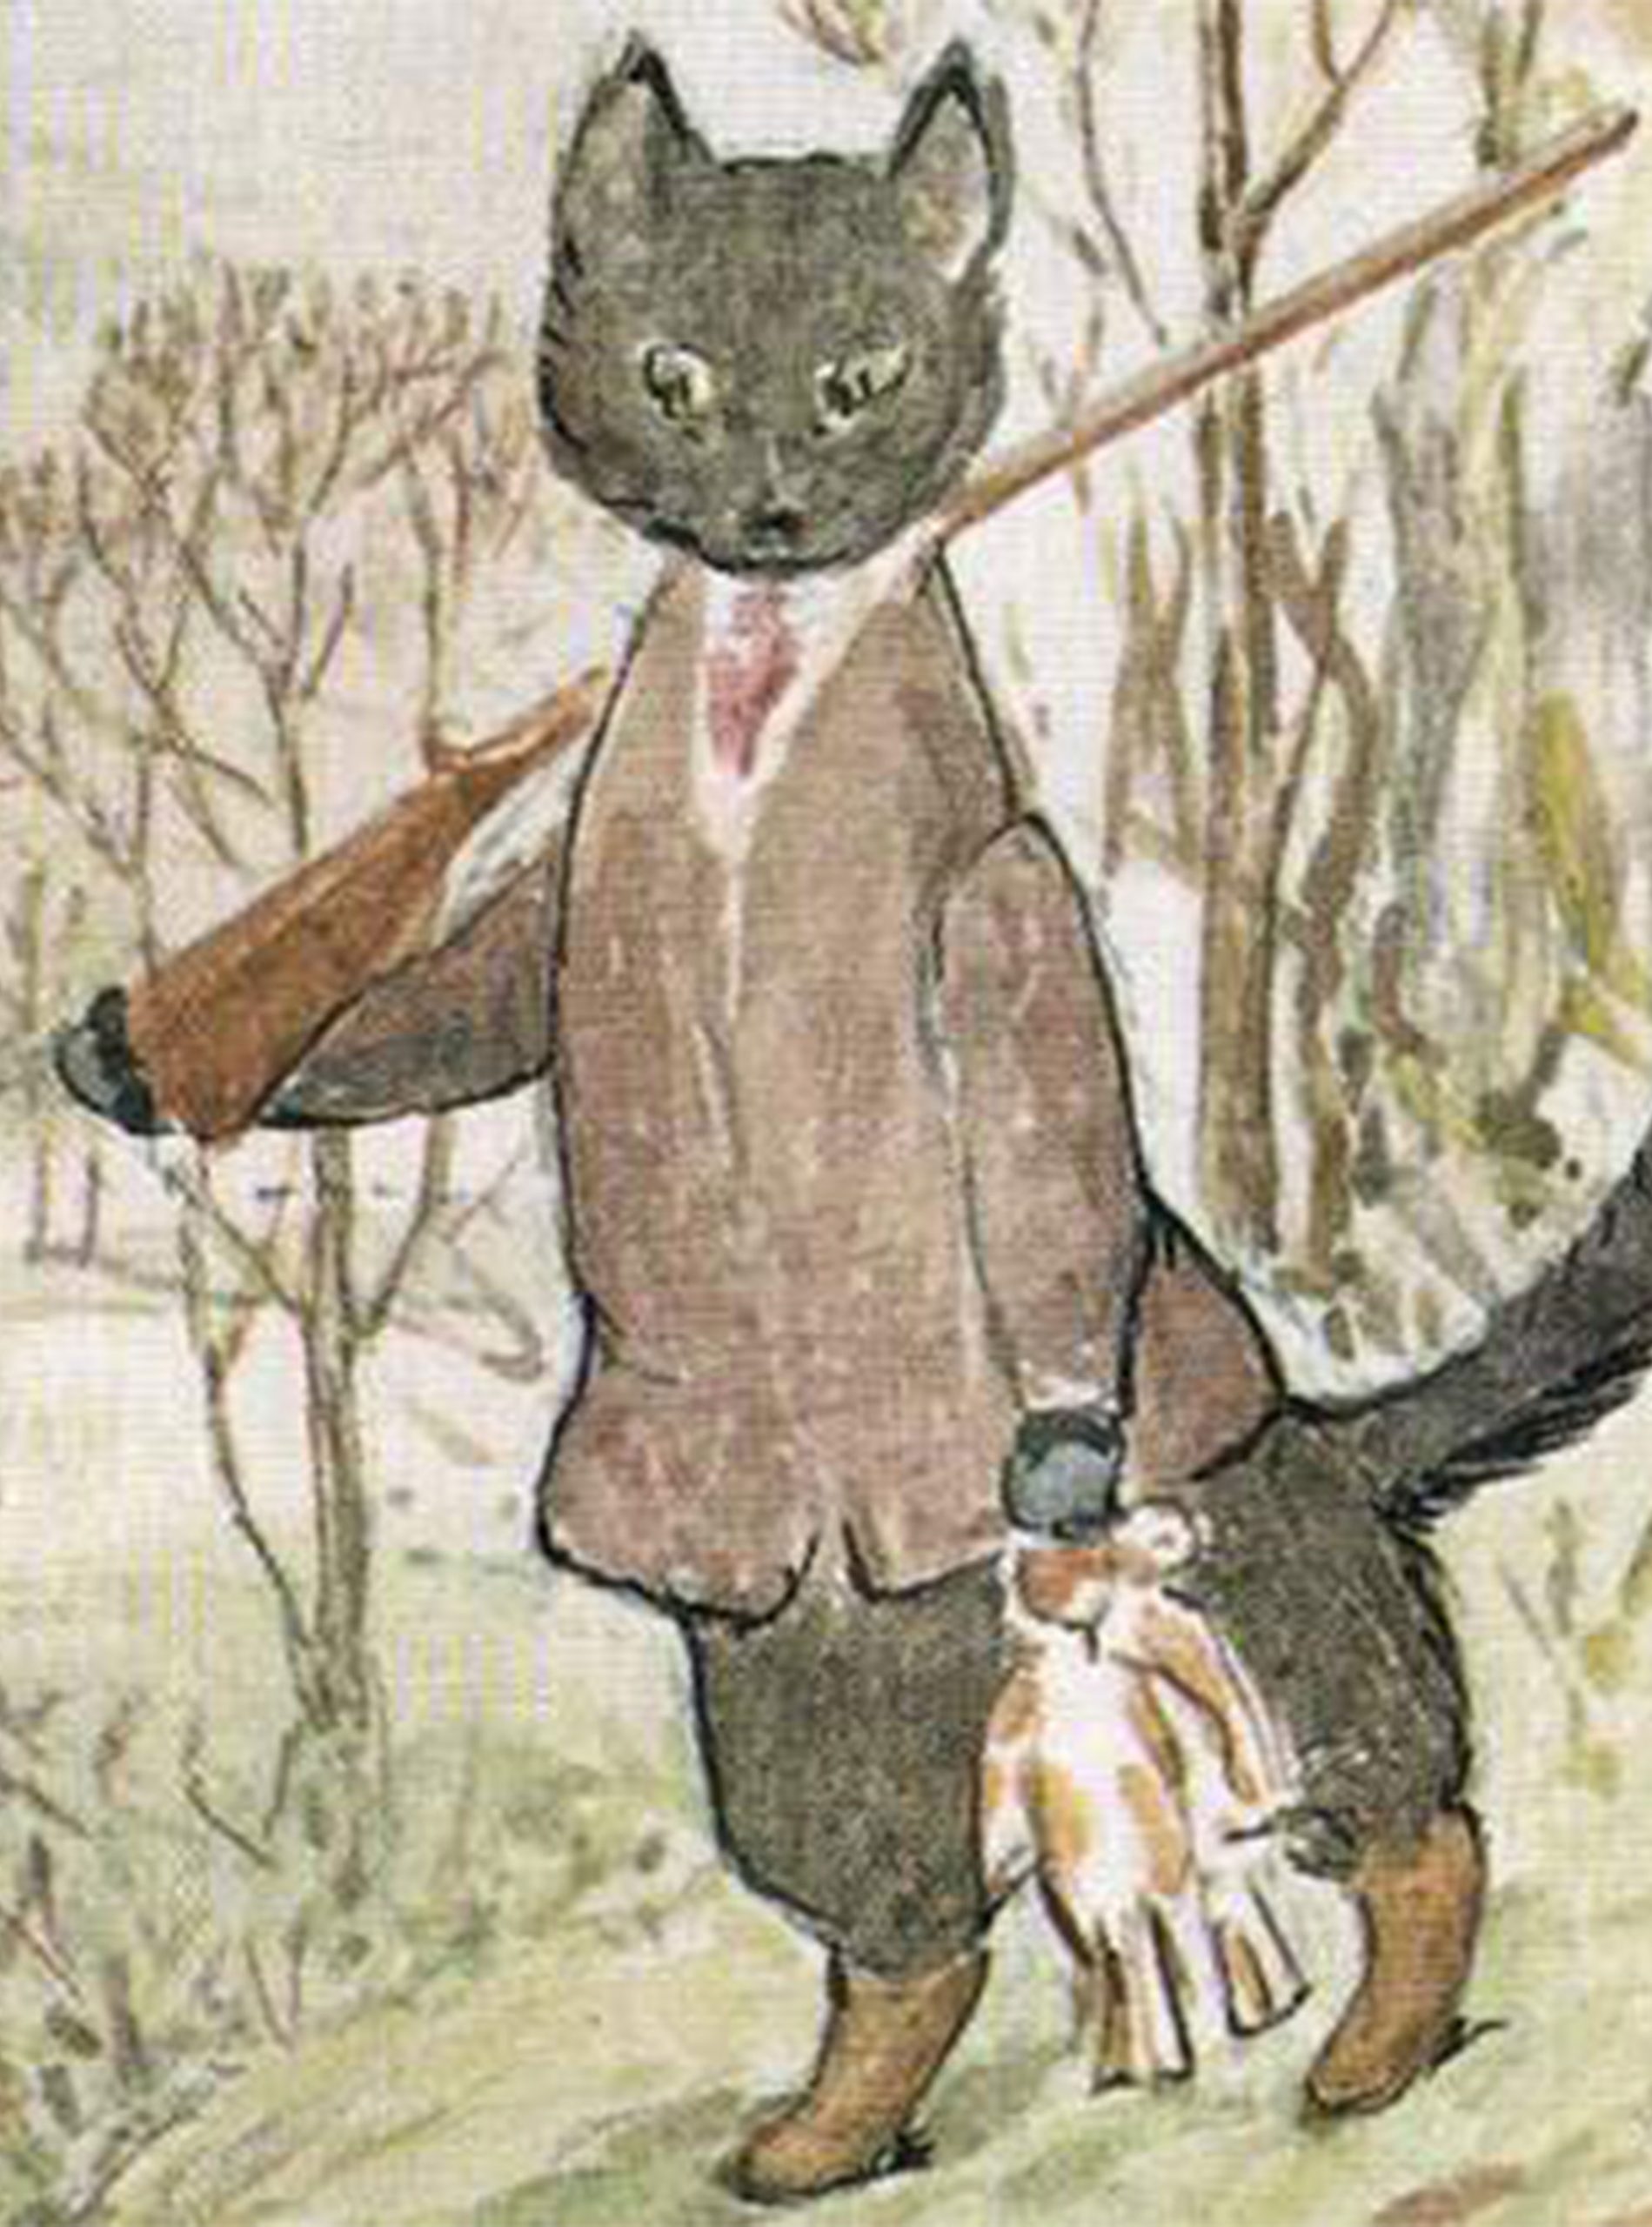 A kitty leads a double life in Beatrix Potter's posthumously published tale